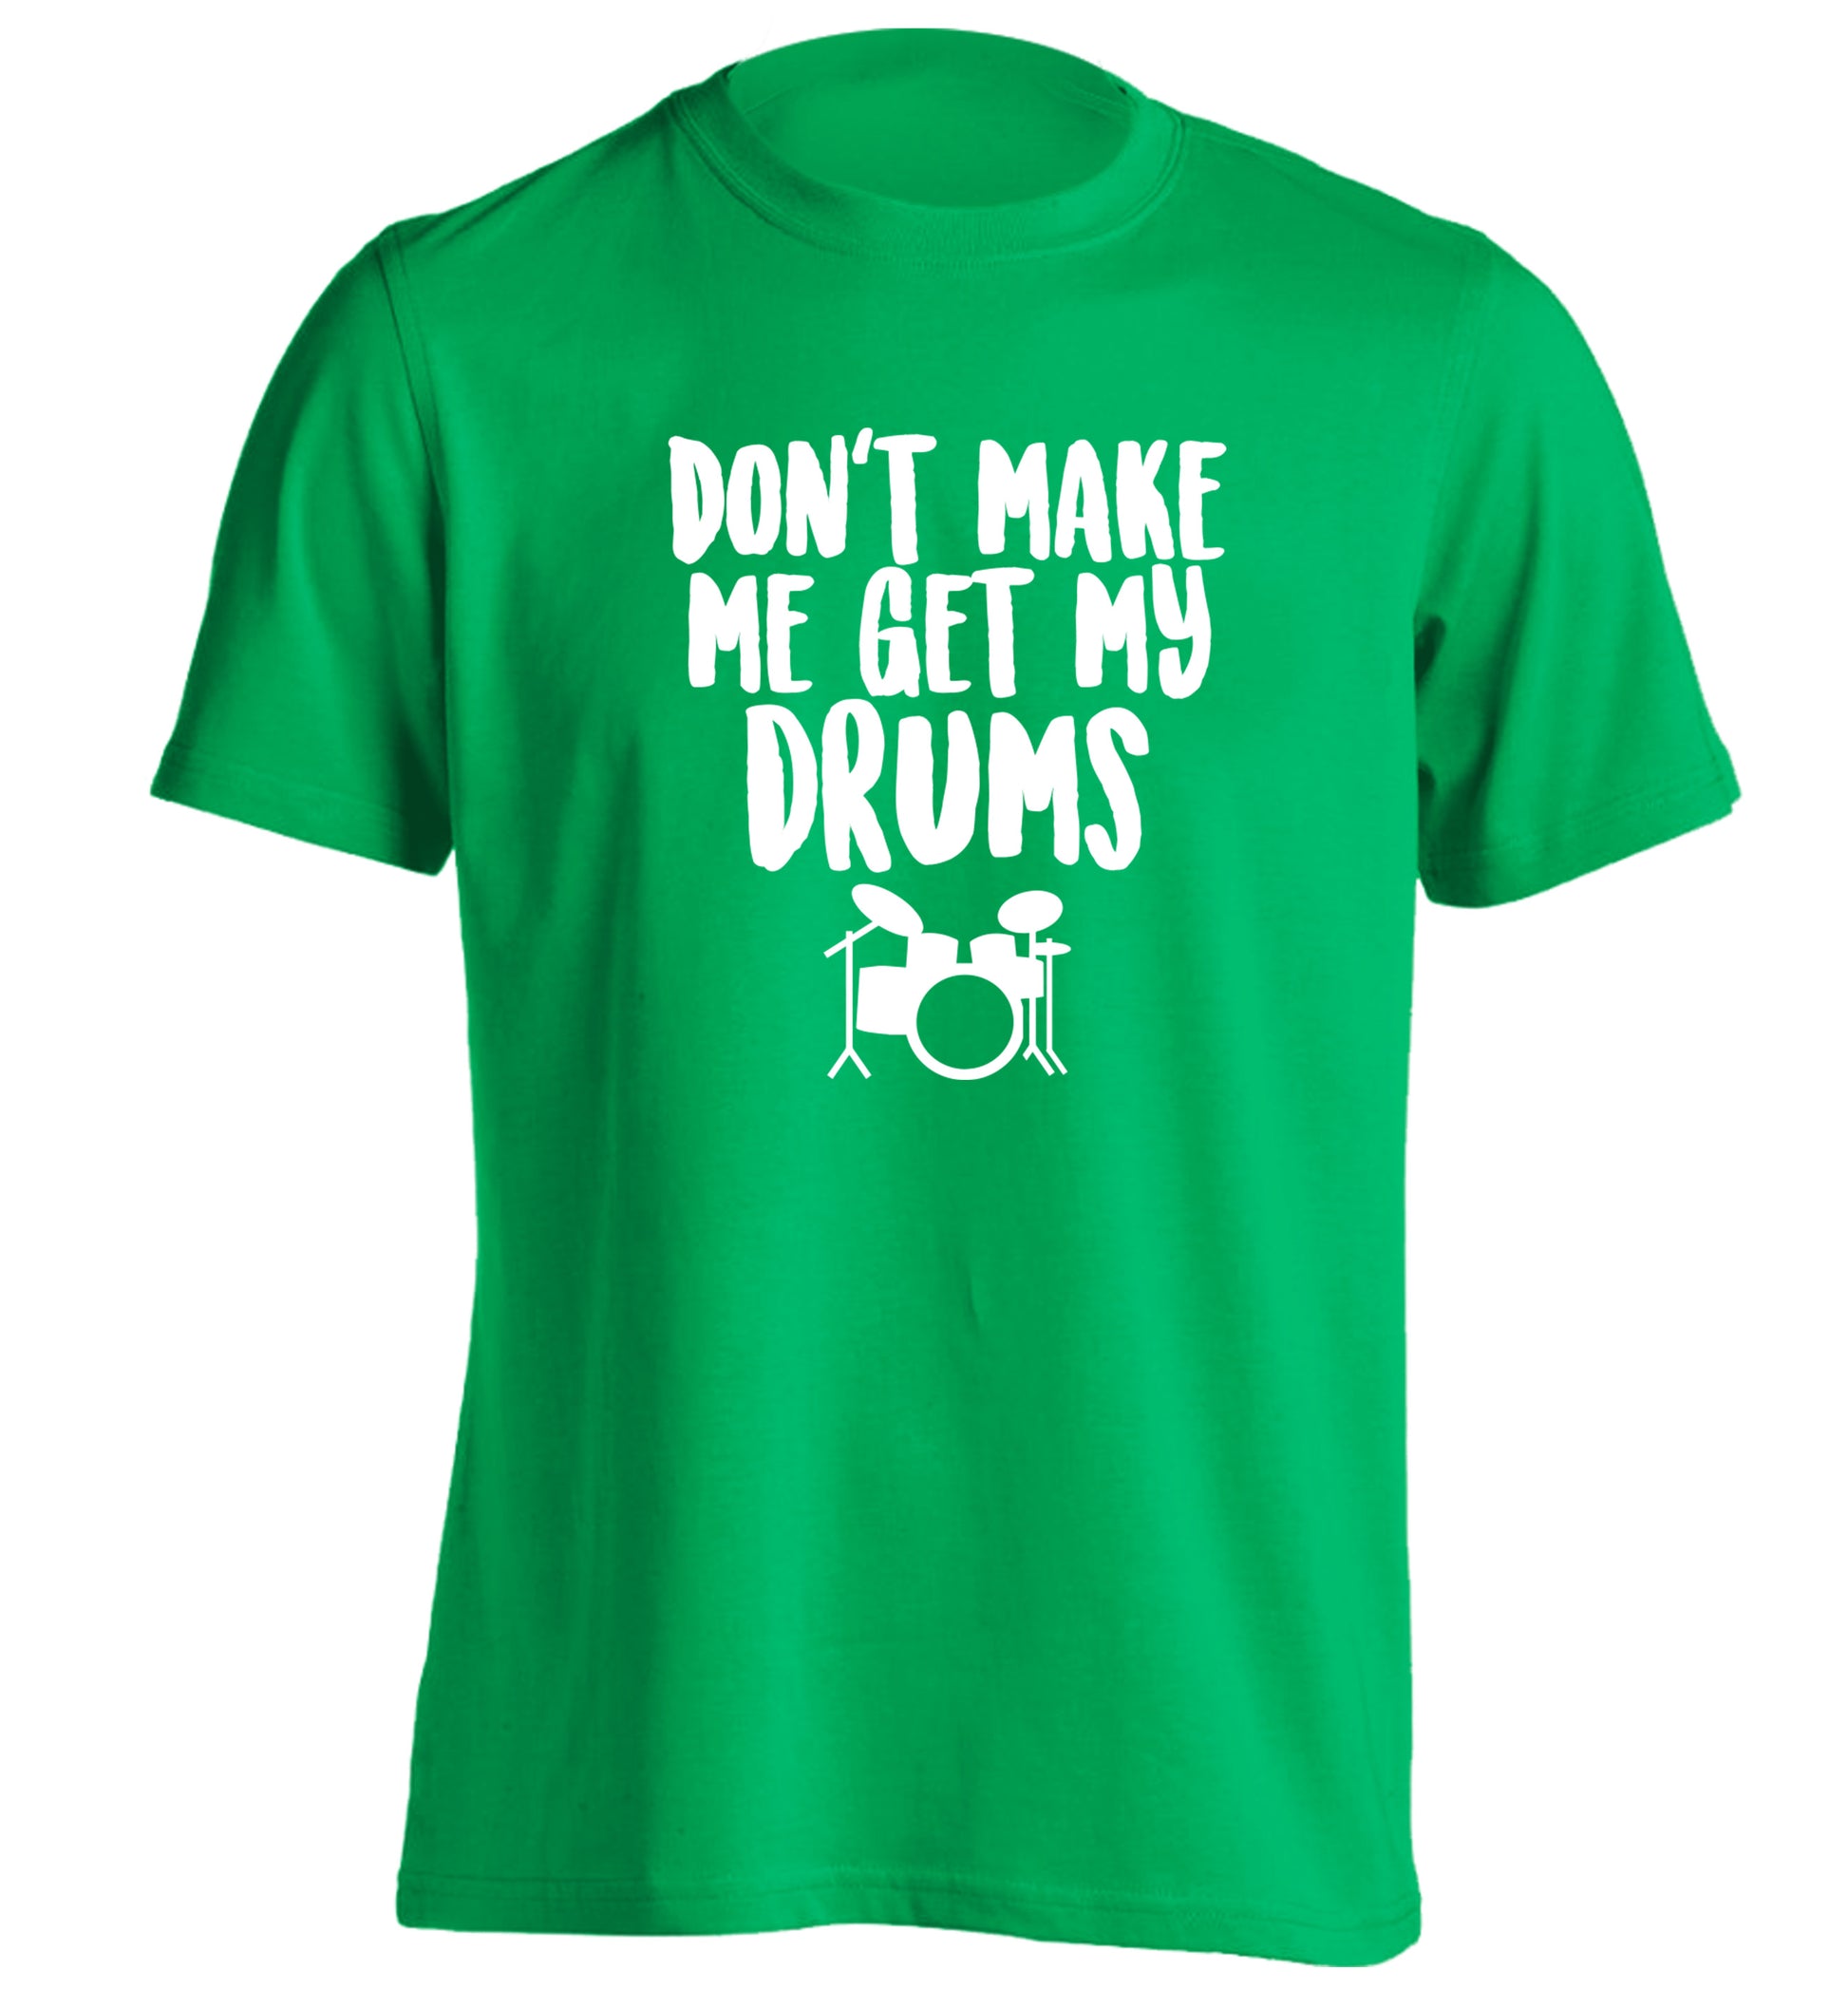 Don't make me get my drums adults unisex green Tshirt 2XL